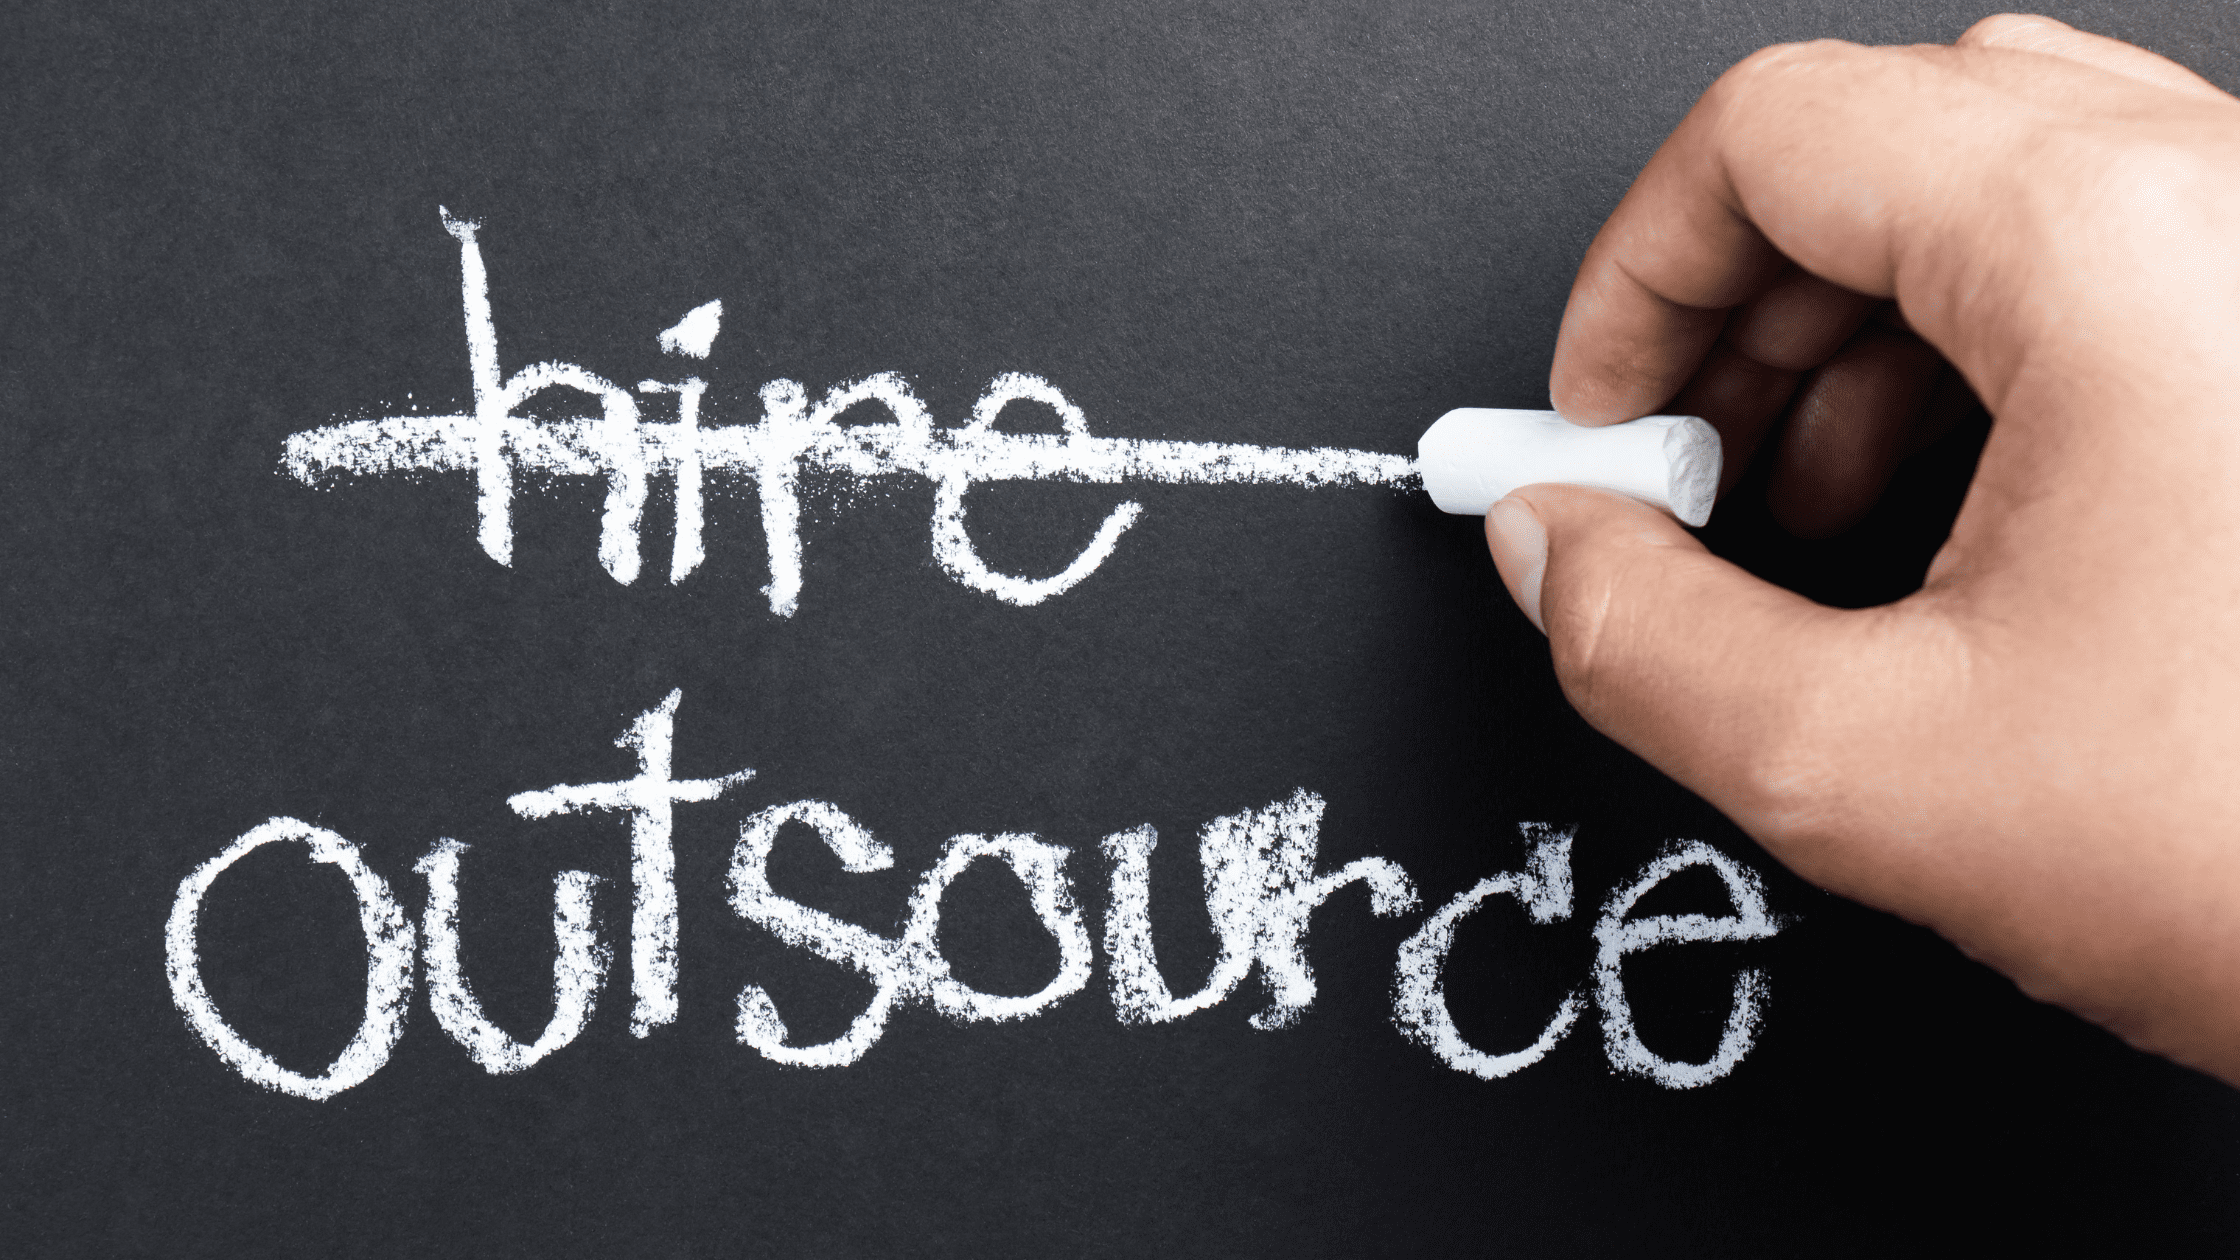 hire crossed out and outsource